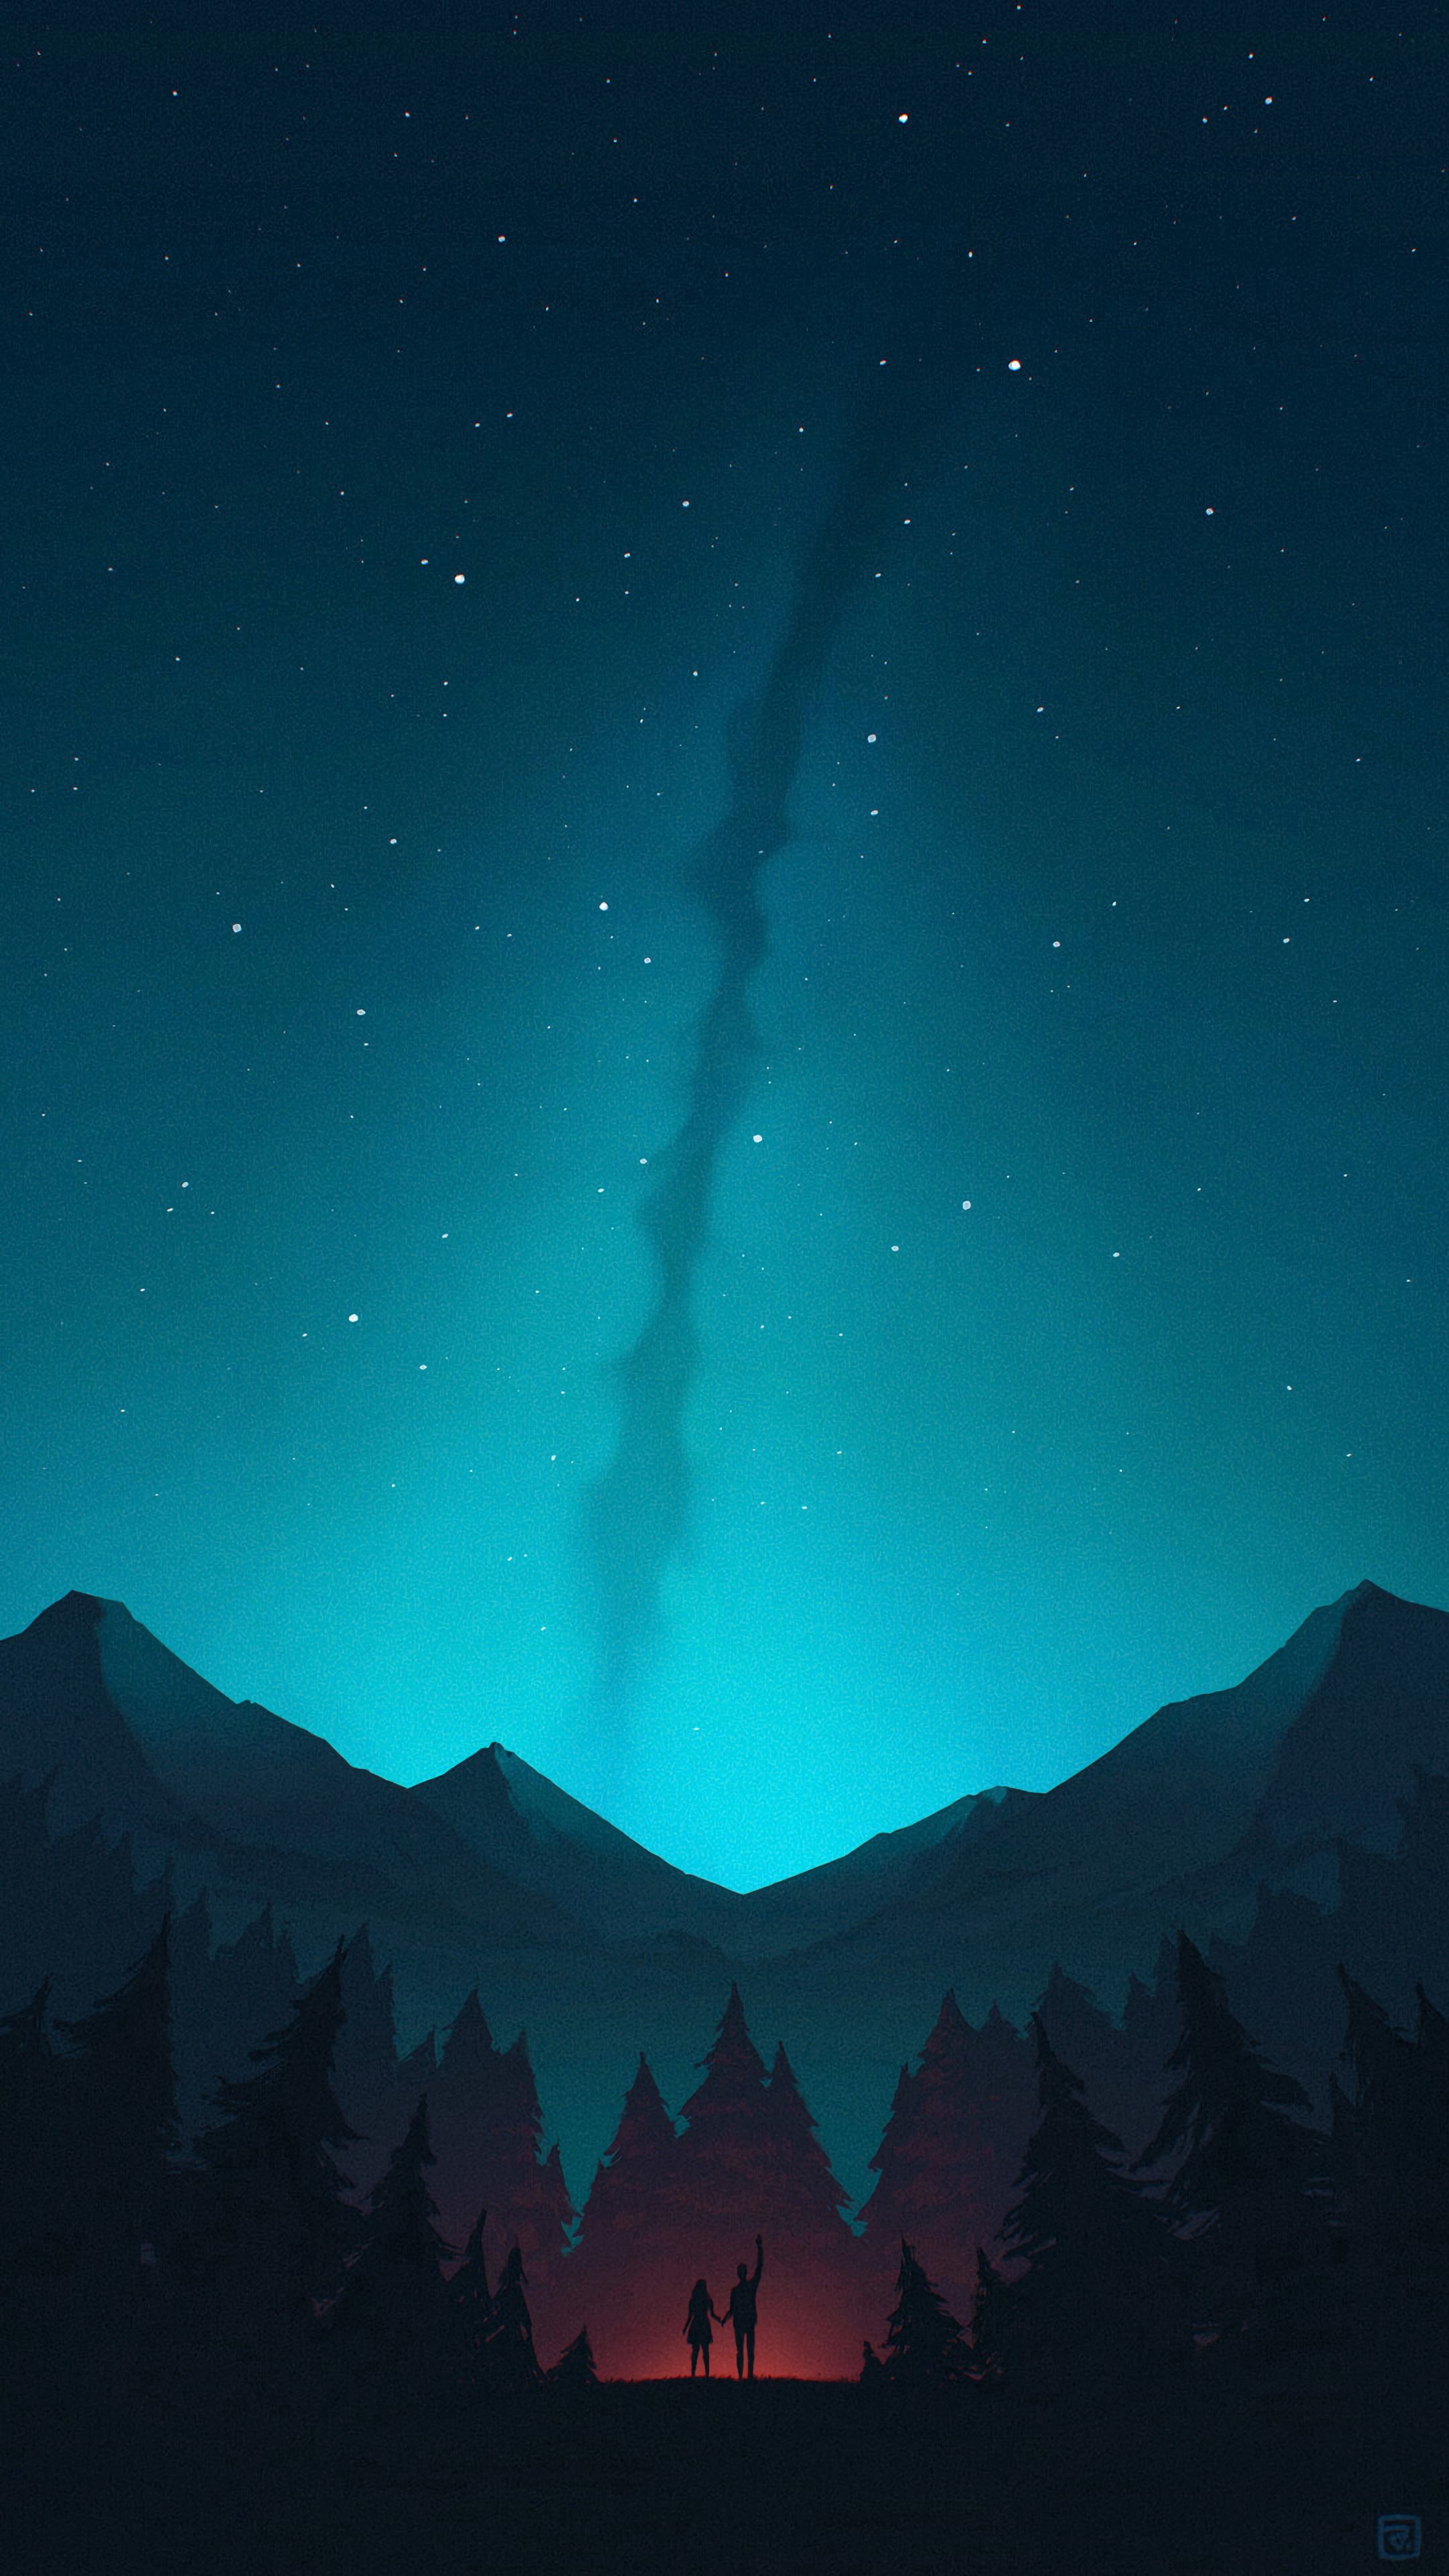 Free HD art, night, silhouettes, mountains, forest, starry sky